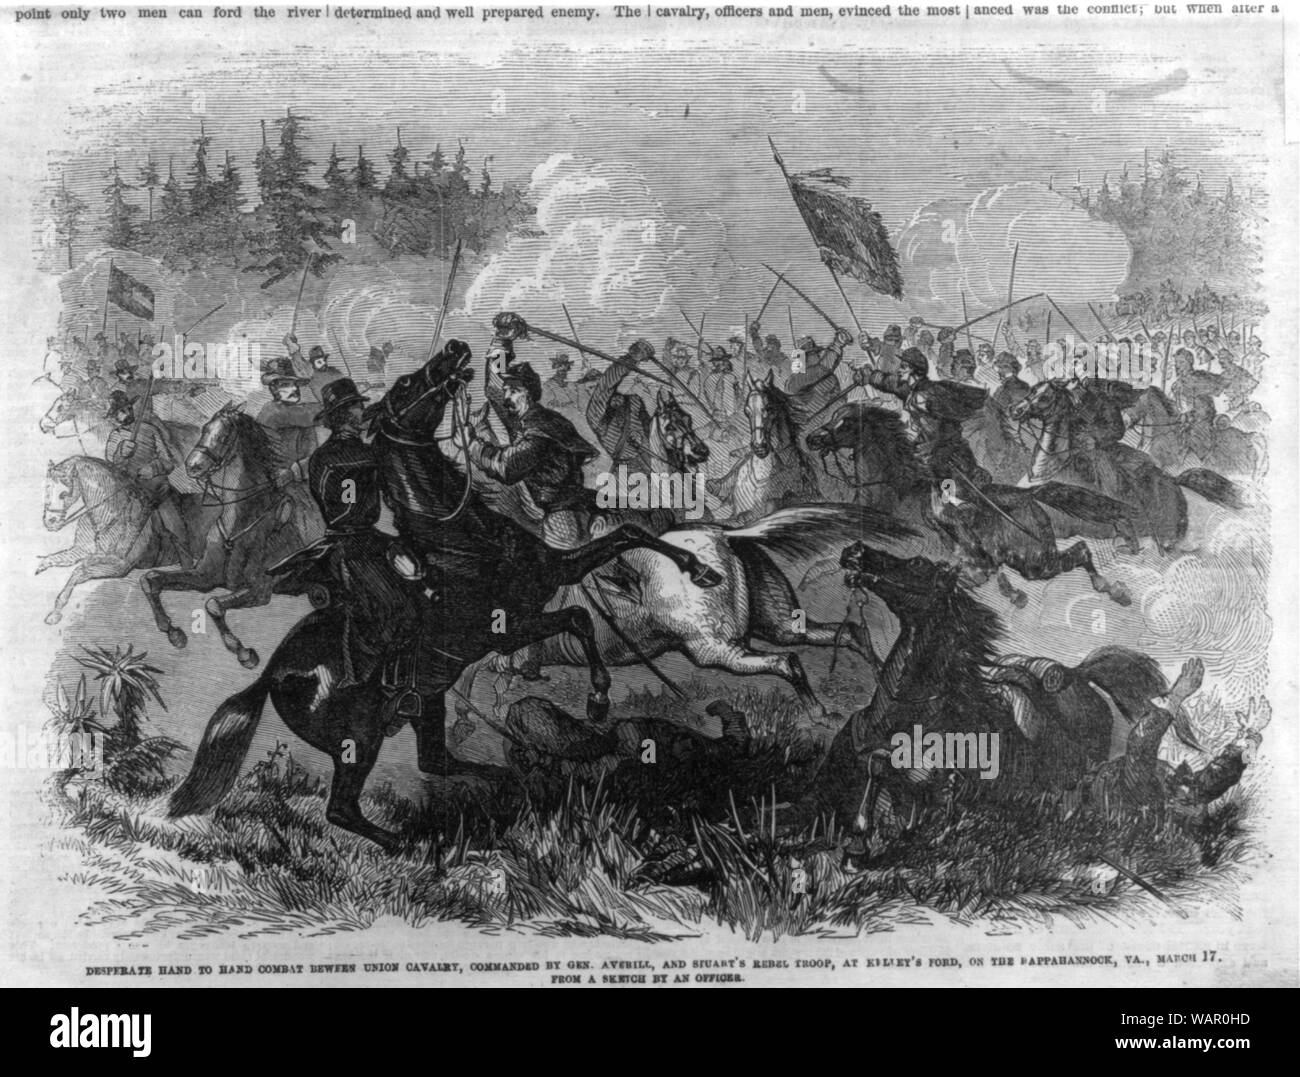 Desperate hand to hand combat between Union Cavalry, commanded by Gen. Averill [i.e. Averell] and Stuart's Rebel Troop, at Killey's Ford [i.e. Kelly's Ford], on the Rappahannock, Va., March 17 [1863] Stock Photo